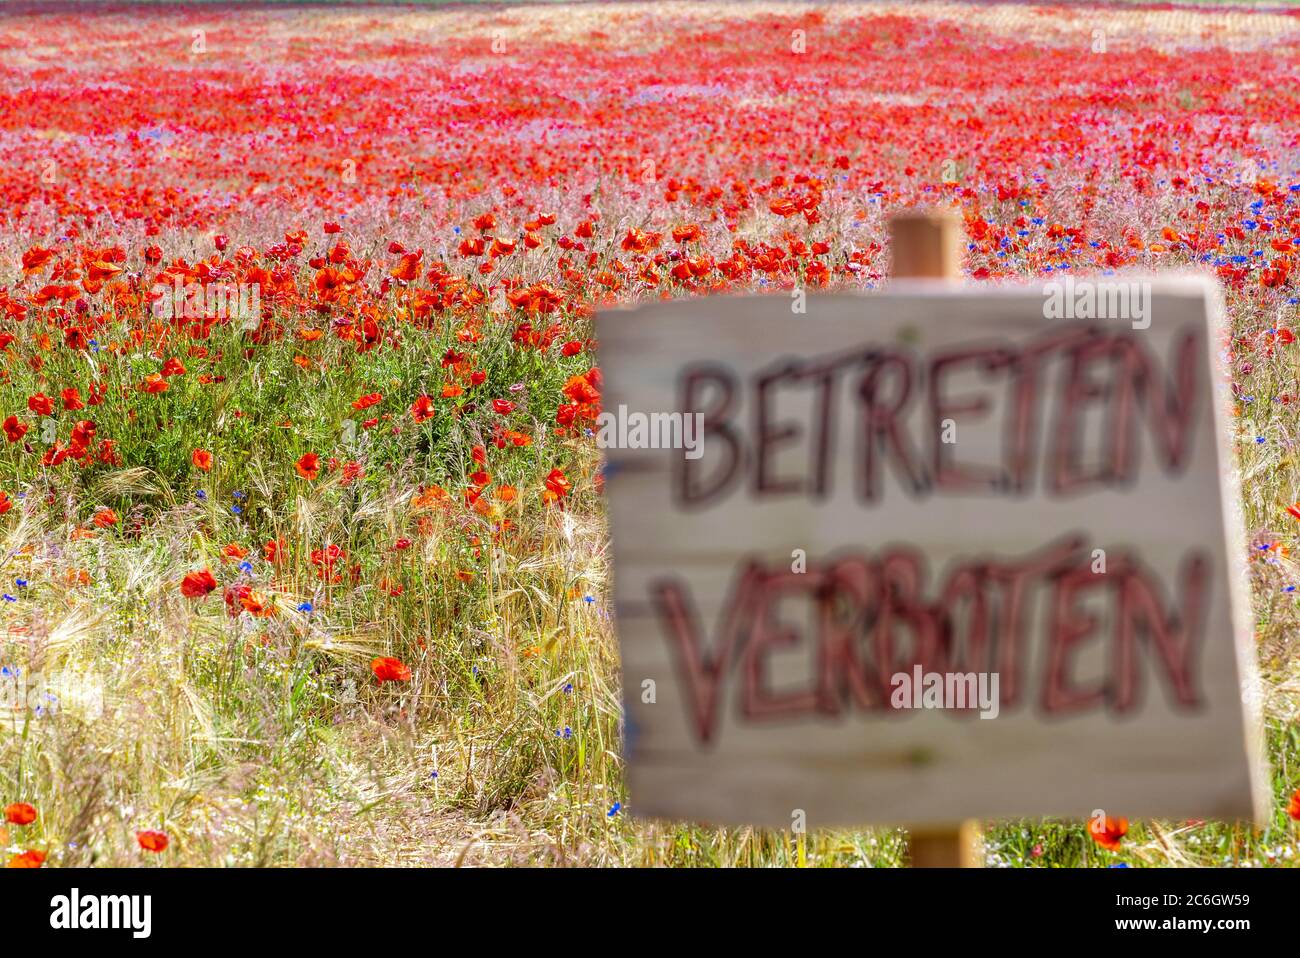 Spitzkuhn, Germany. 23rd June, 2020. A wooden sign with the inscription 'No Trespassing' is placed at the edge of a field with flowering poppy plants. Credit: Jens Büttner/dpa-Zentralbild/ZB/dpa/Alamy Live News Stock Photo